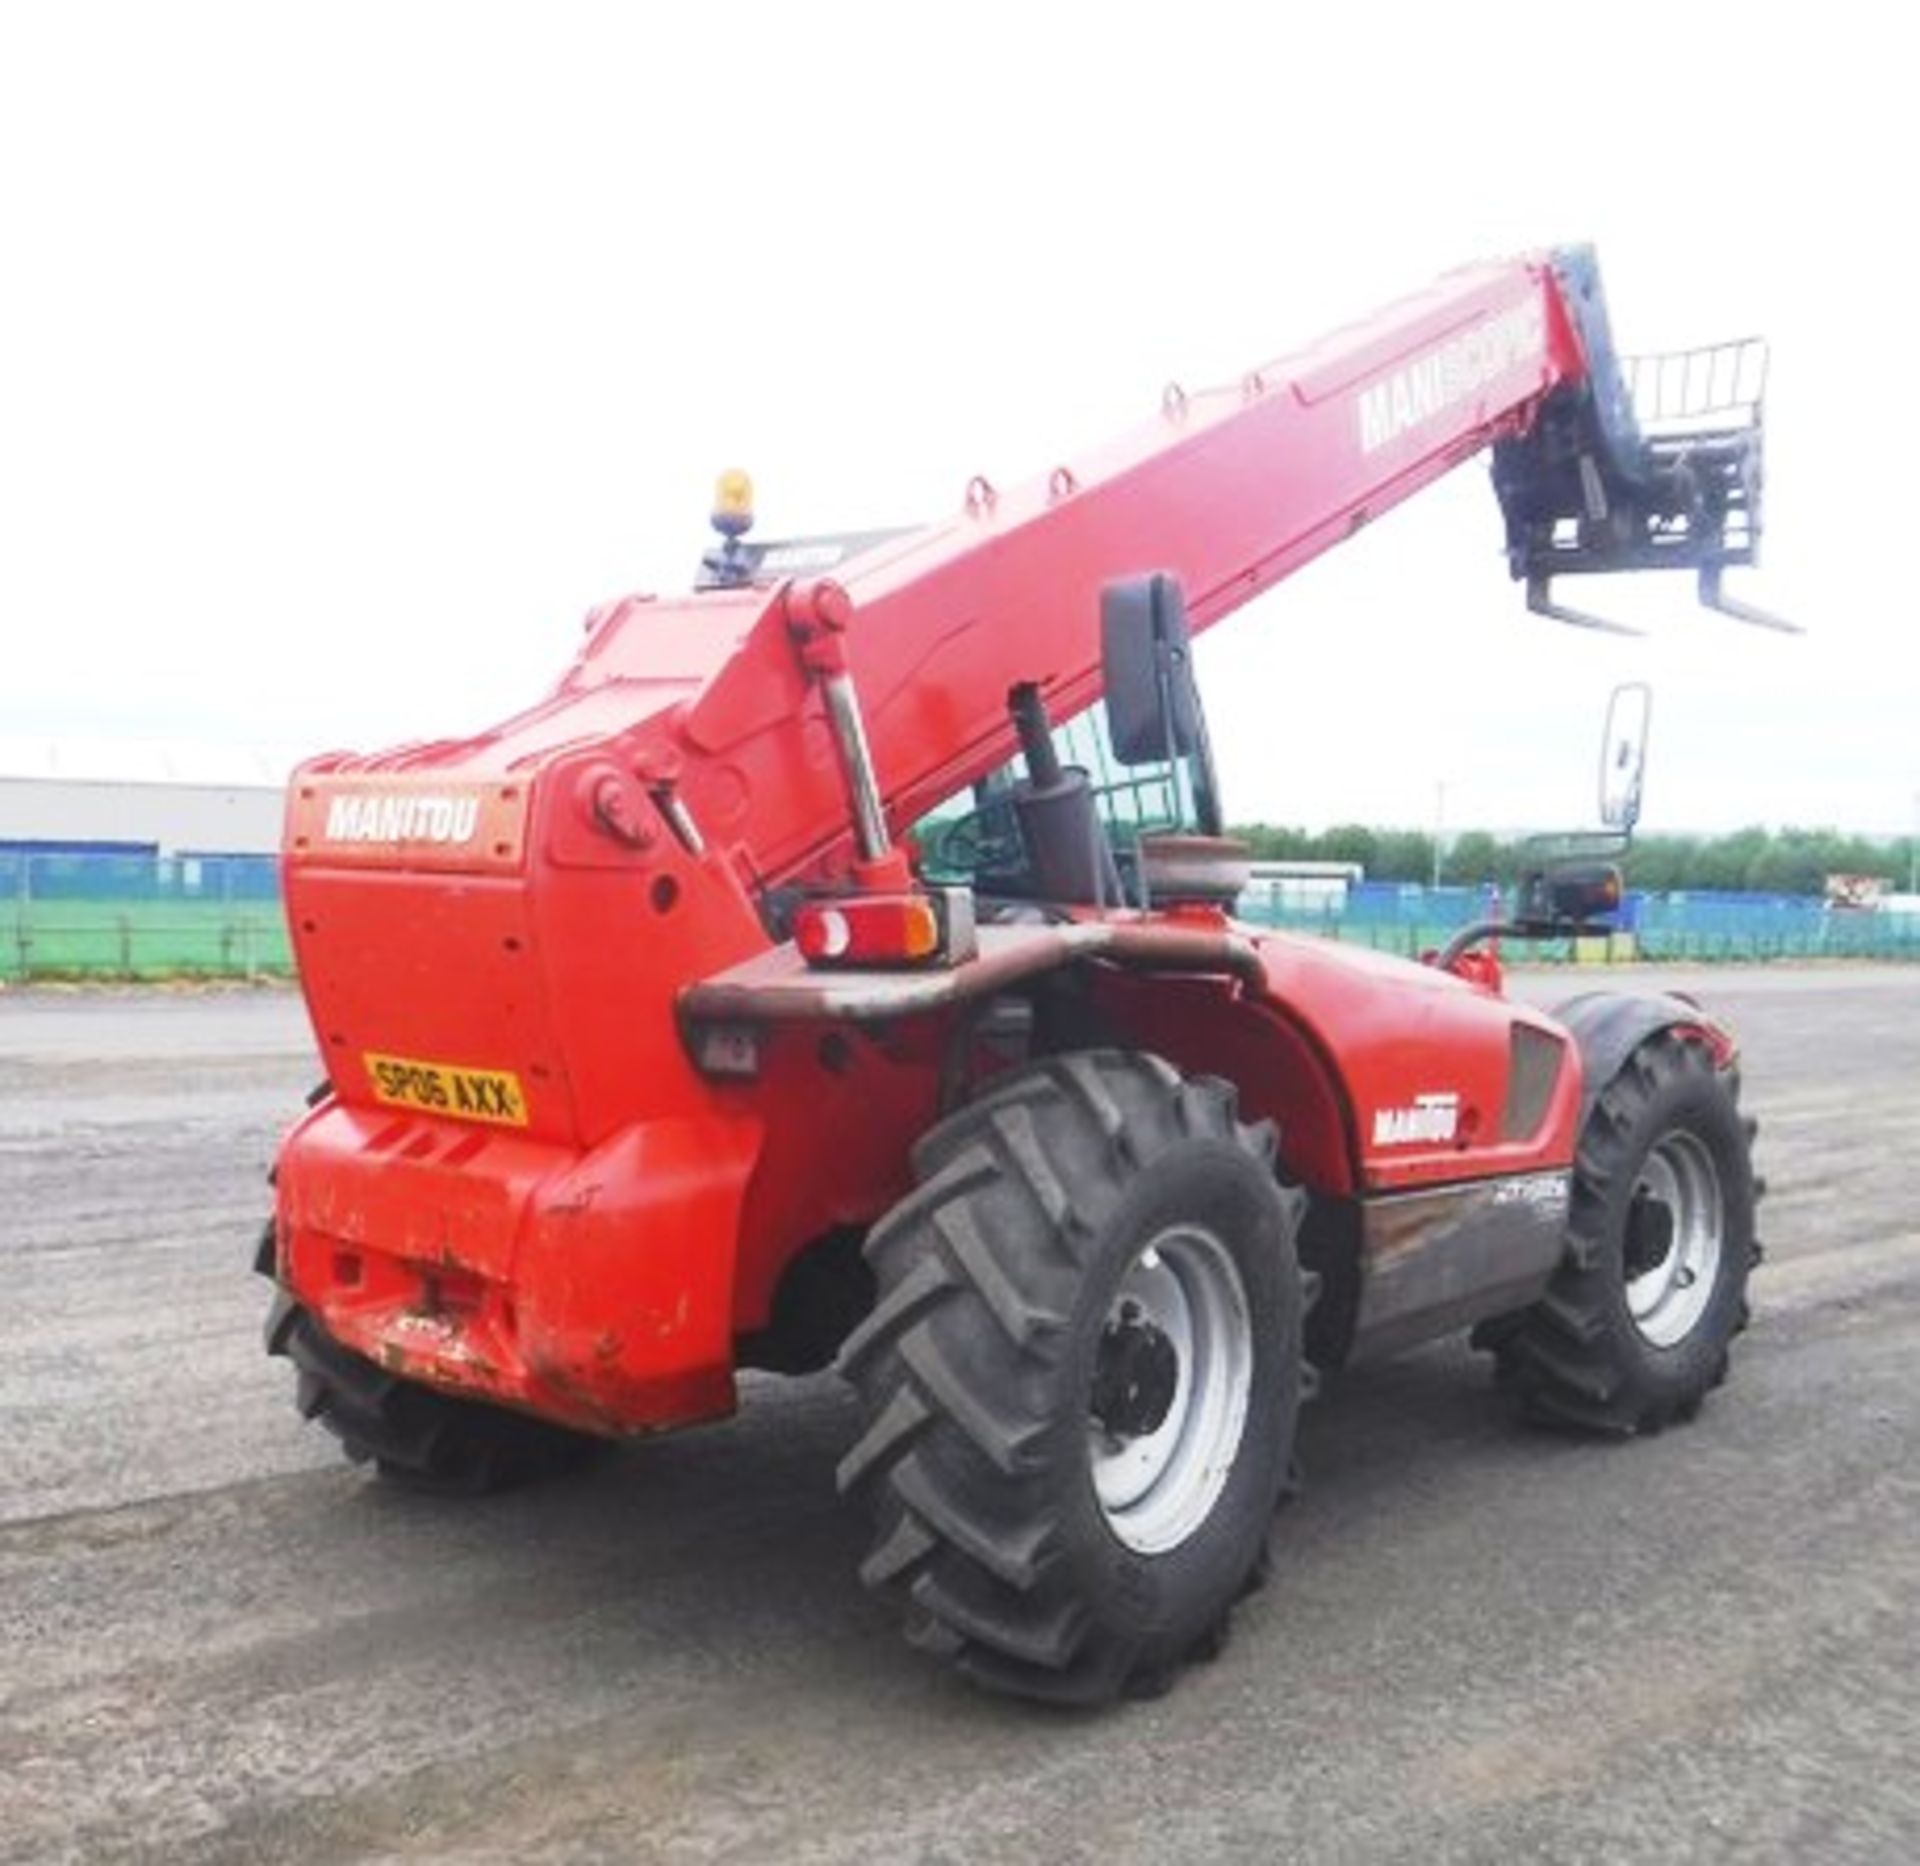 2006 MANITOU 14/35 TELEHANDLER c/w bucket & forks s/n 1230044. Reg no SP06 AXX. 2646HRS. - Image 9 of 16